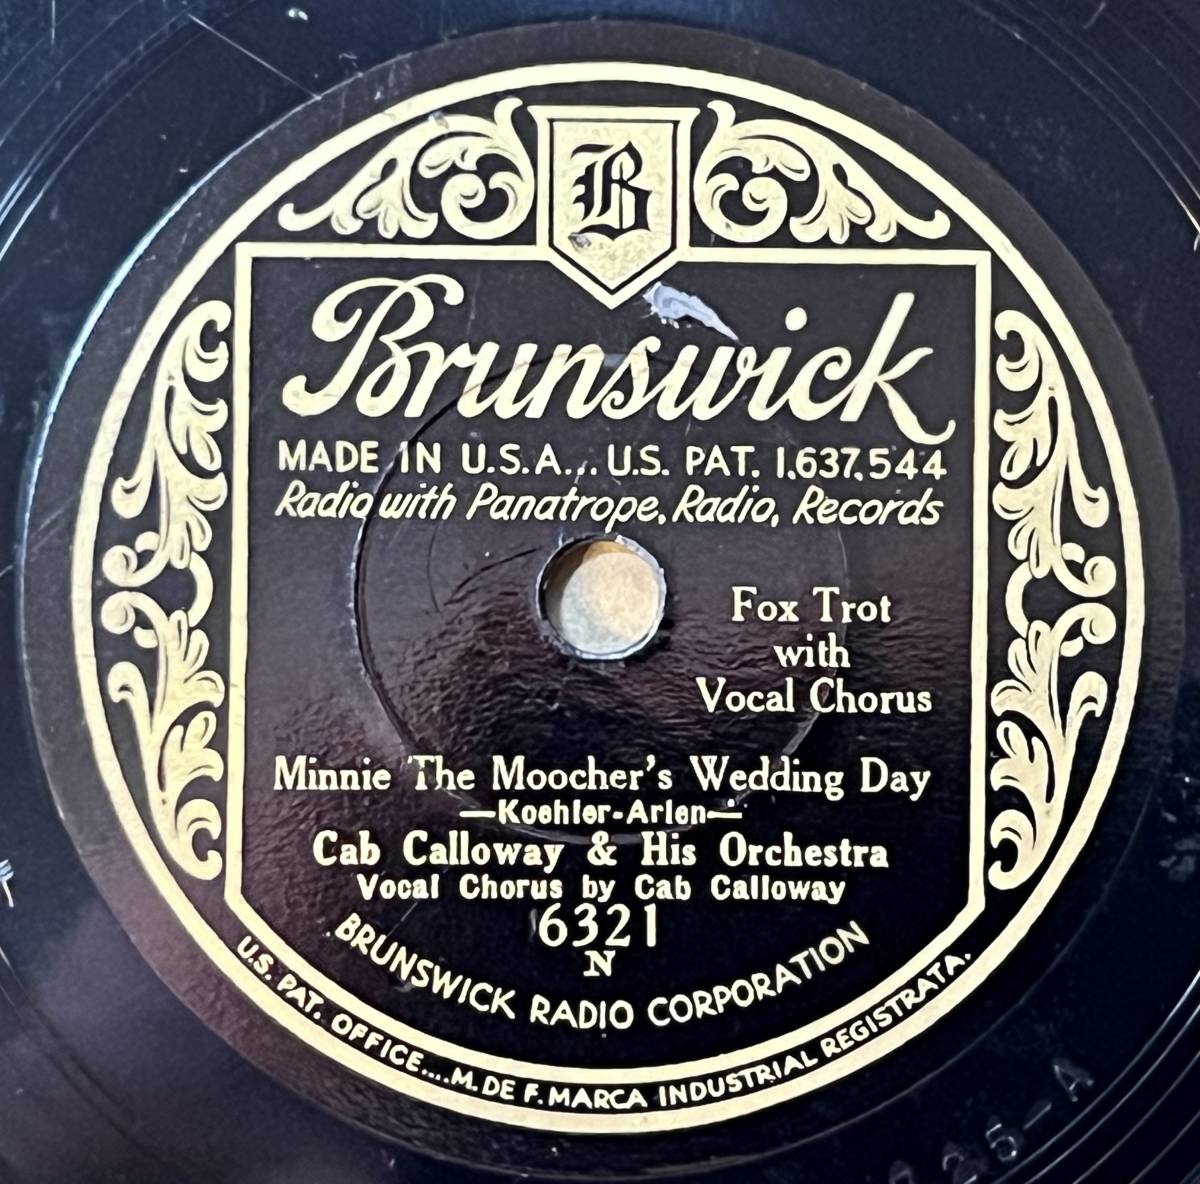 CAB CALLOWAY & HIS ORCH. BRUNSWICK Minnie The Moocher’s Wedding Day/ Angeline